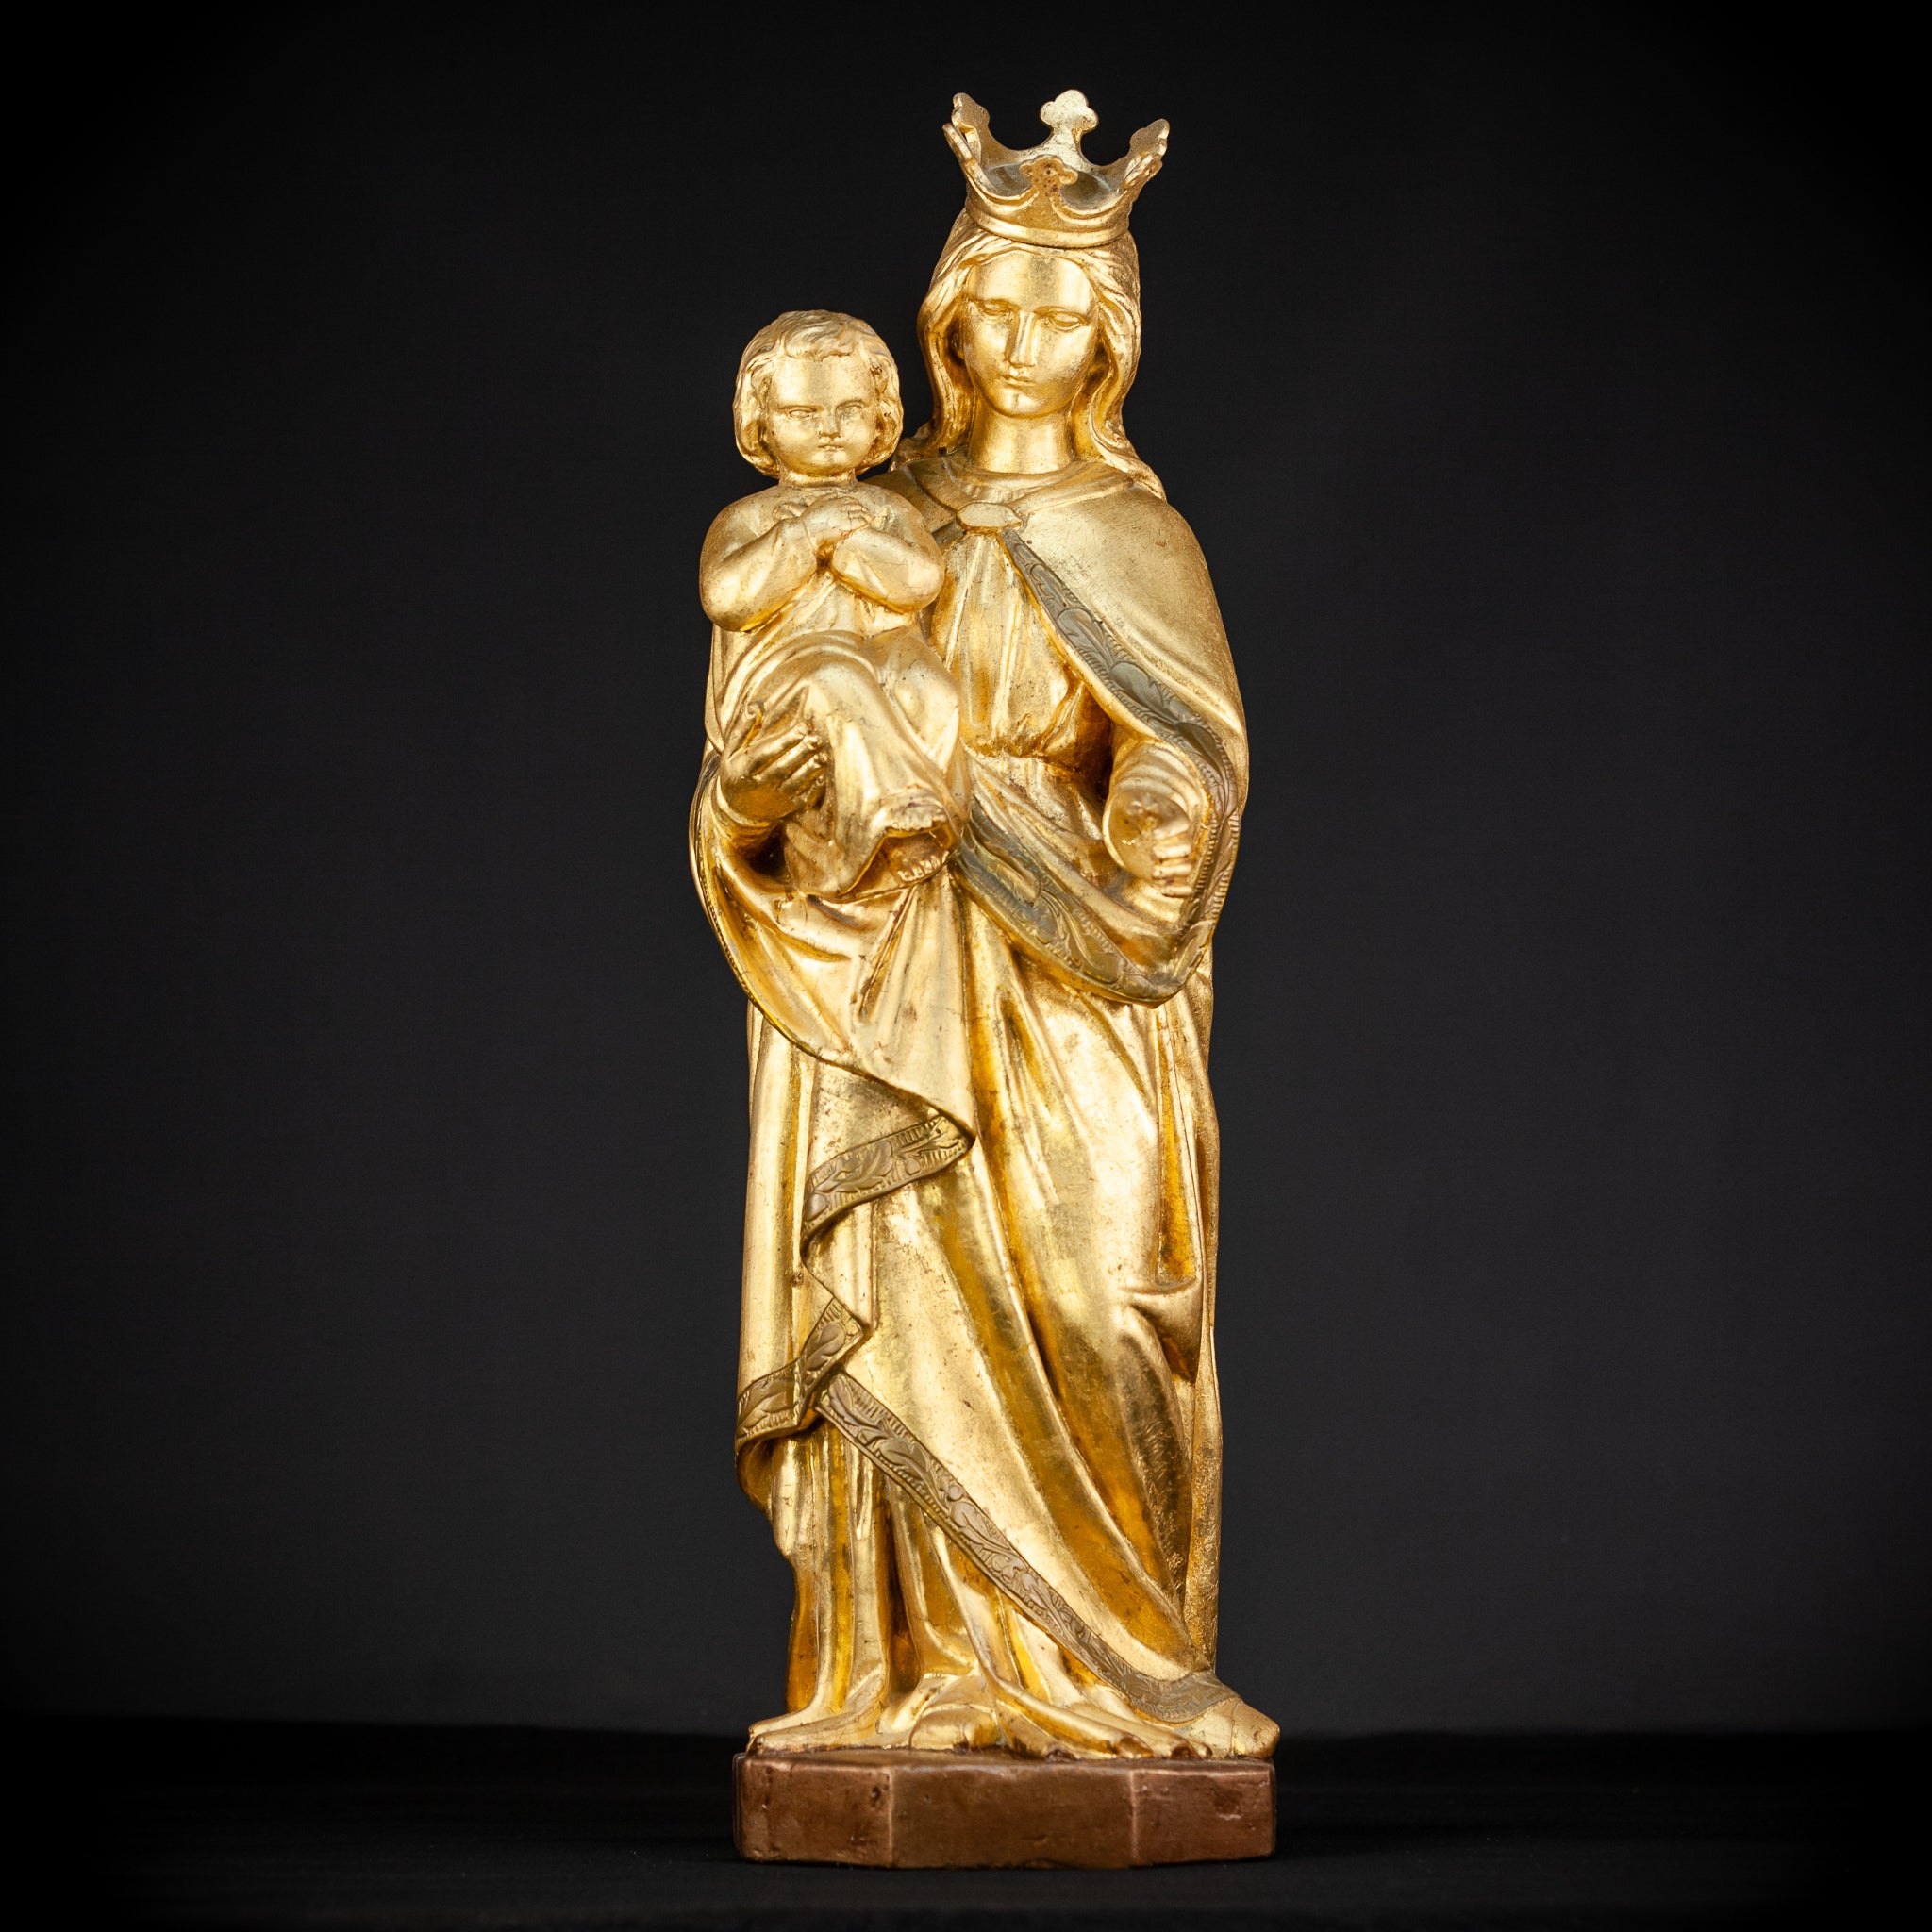 Virgin Mary with Child Jesus Gilded Wooden Sculpture | 1800s Antique | 27.2”/ 69 cm